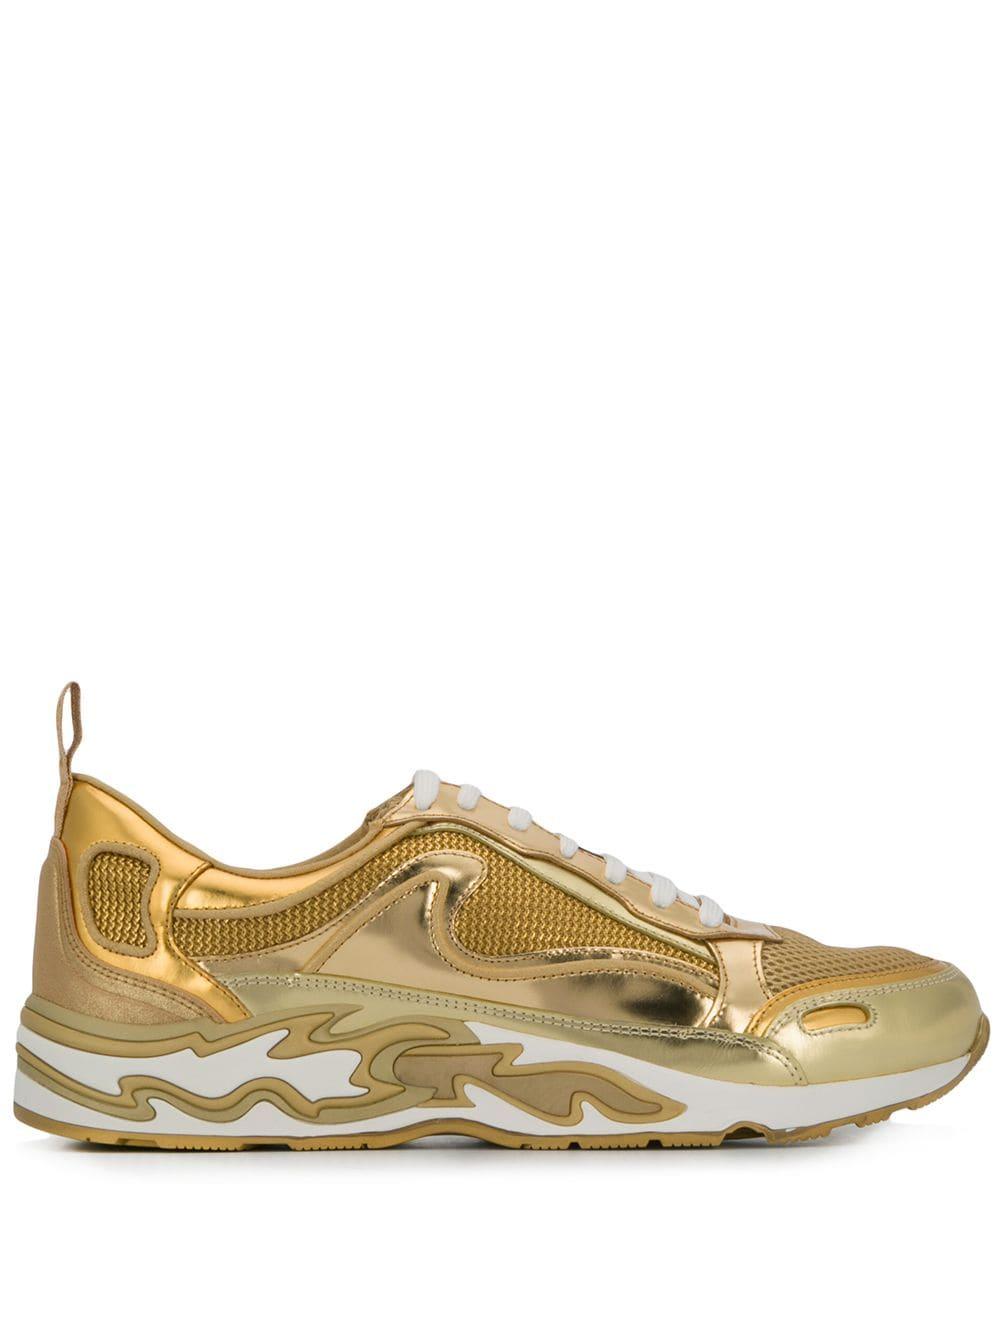 Sandro Leather Flame Sneakers in Gold (Metallic) - Lyst